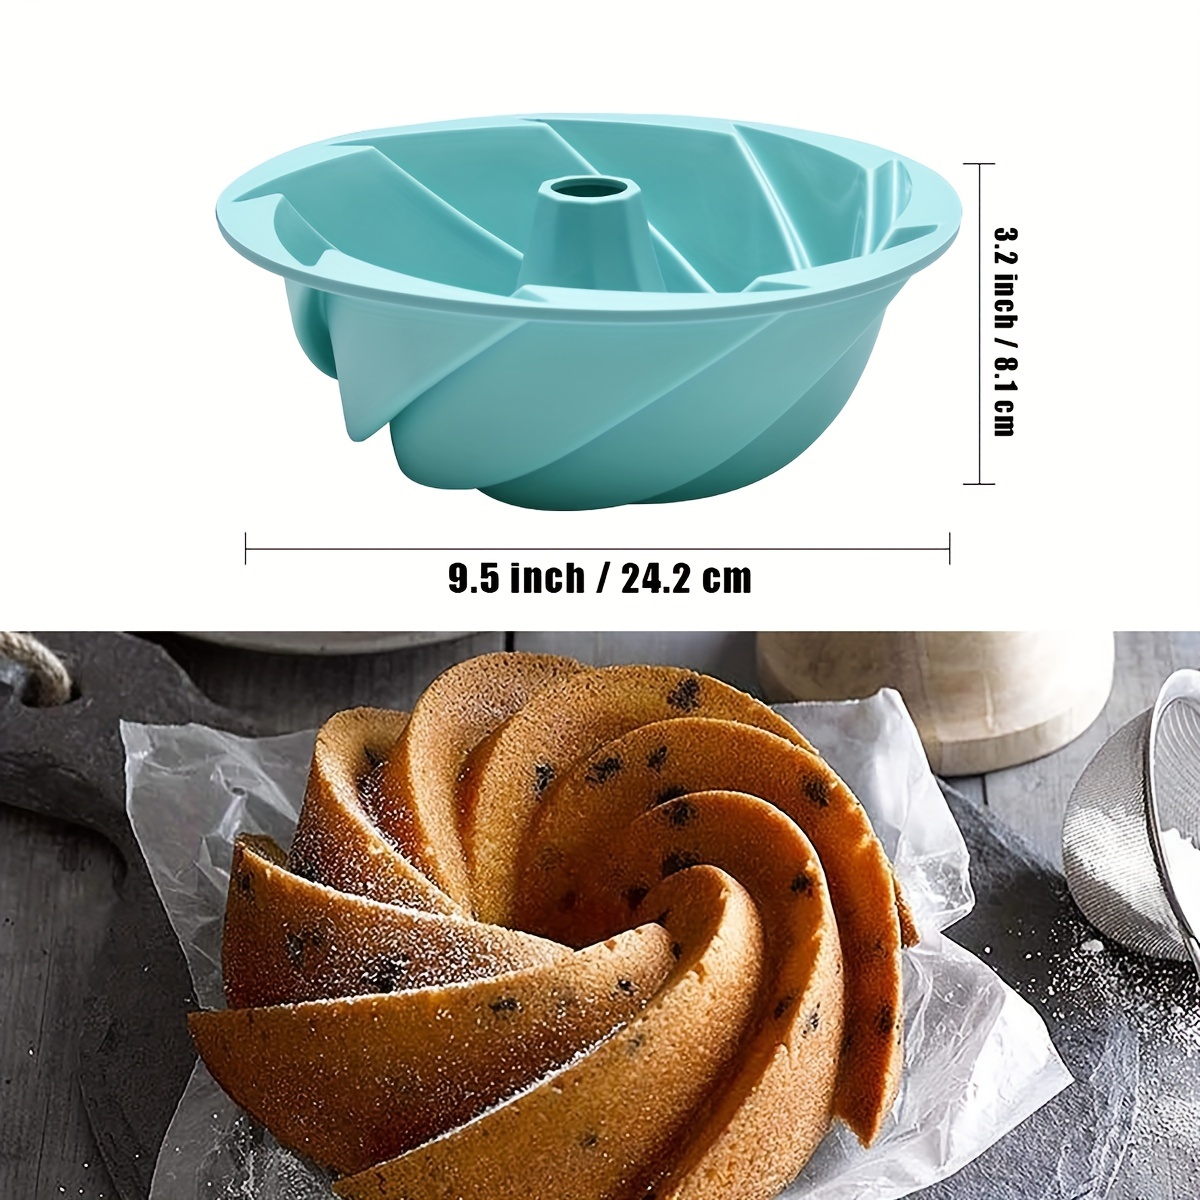 Big Bundt Cake Pan Silicone Mold for Baking Desserts Form Silikon Bread  Baking Accessories Oven Baking Trays Sugarcraft Tools